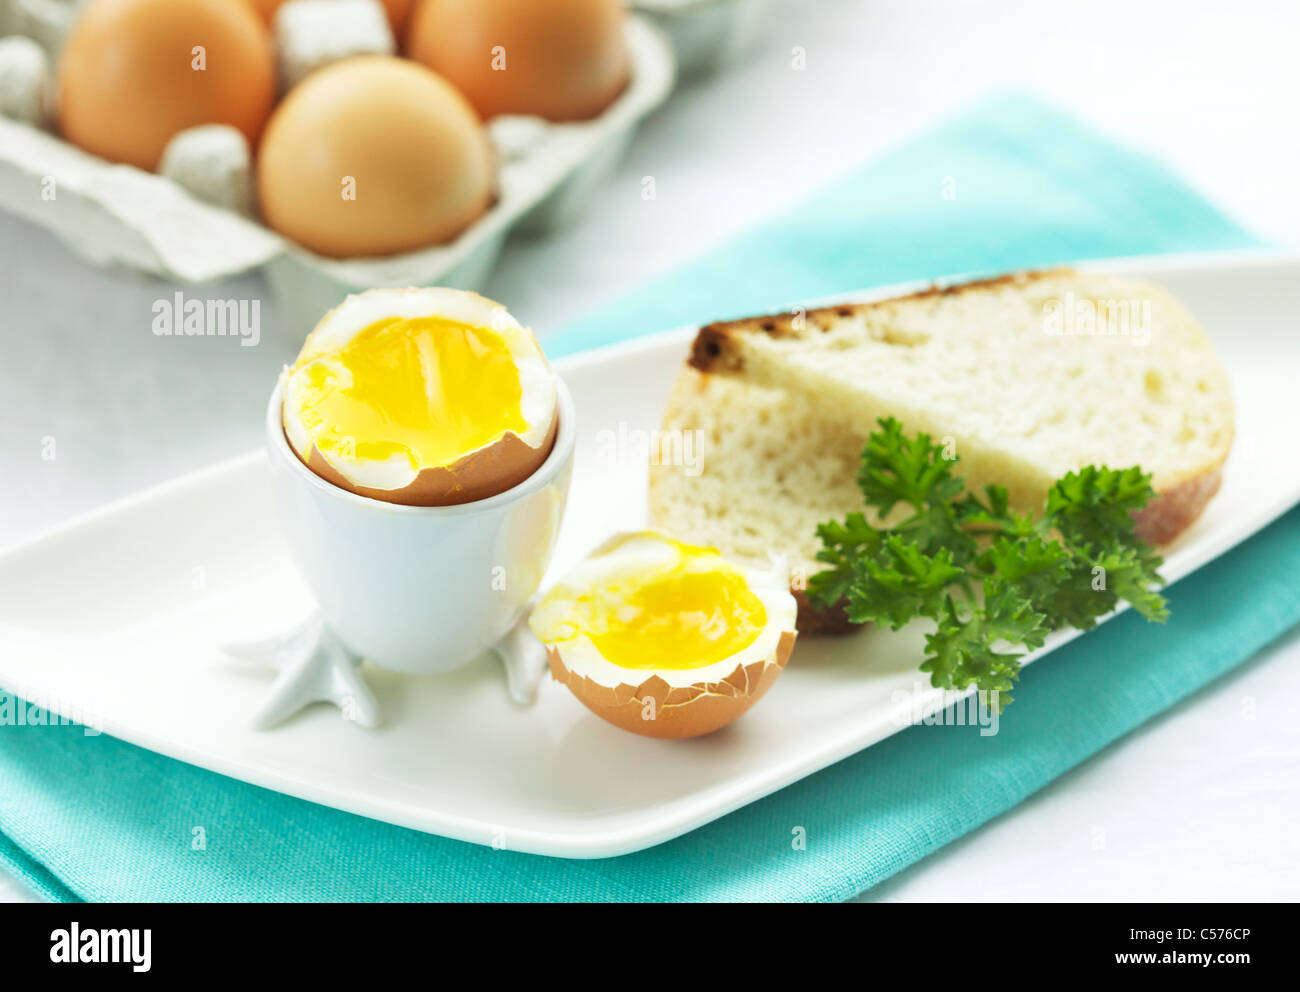 A soft boiled egg and bread for breakfast Stock Photo - Alamy